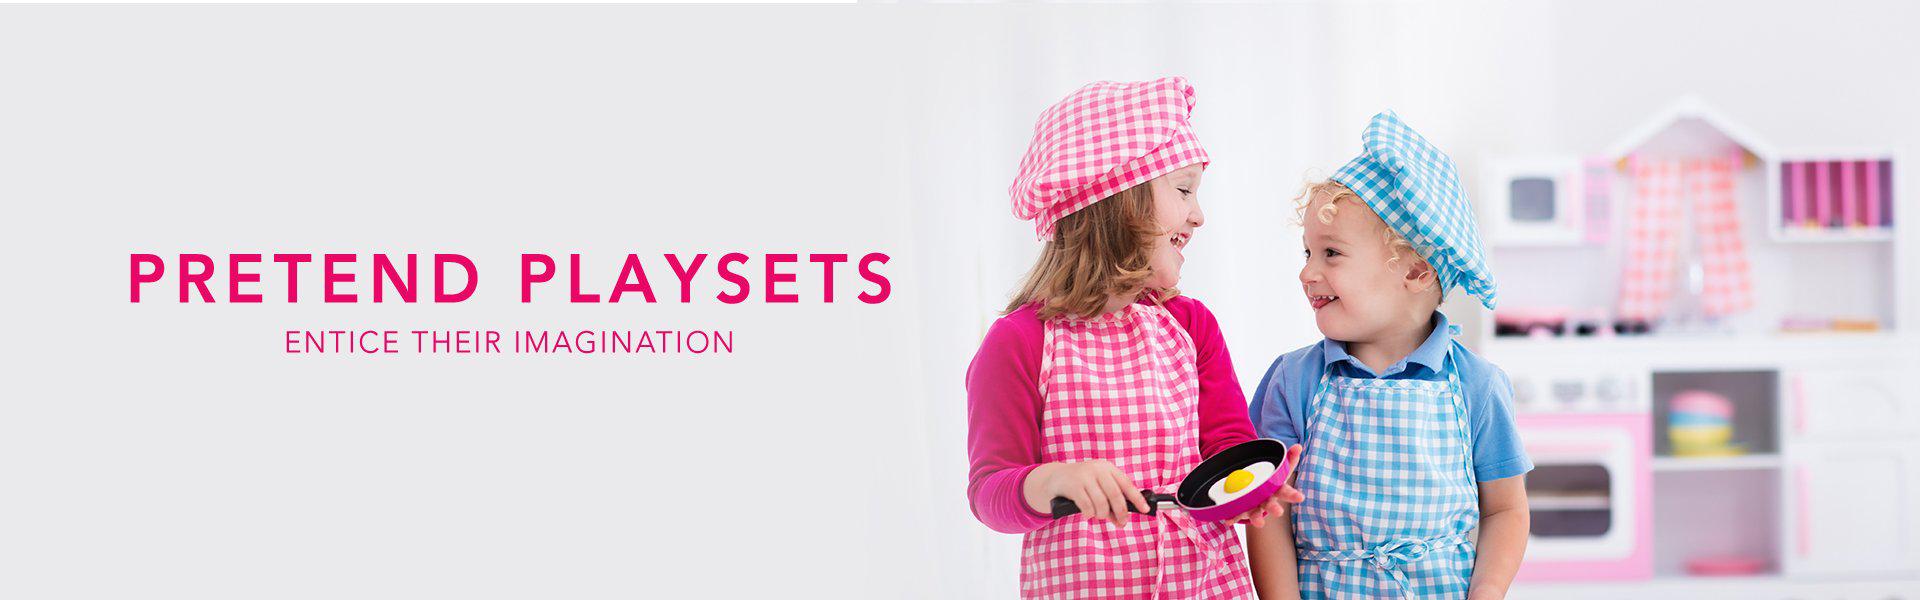 Toy Kitchens for Kids and Play Food | Australia Delivery